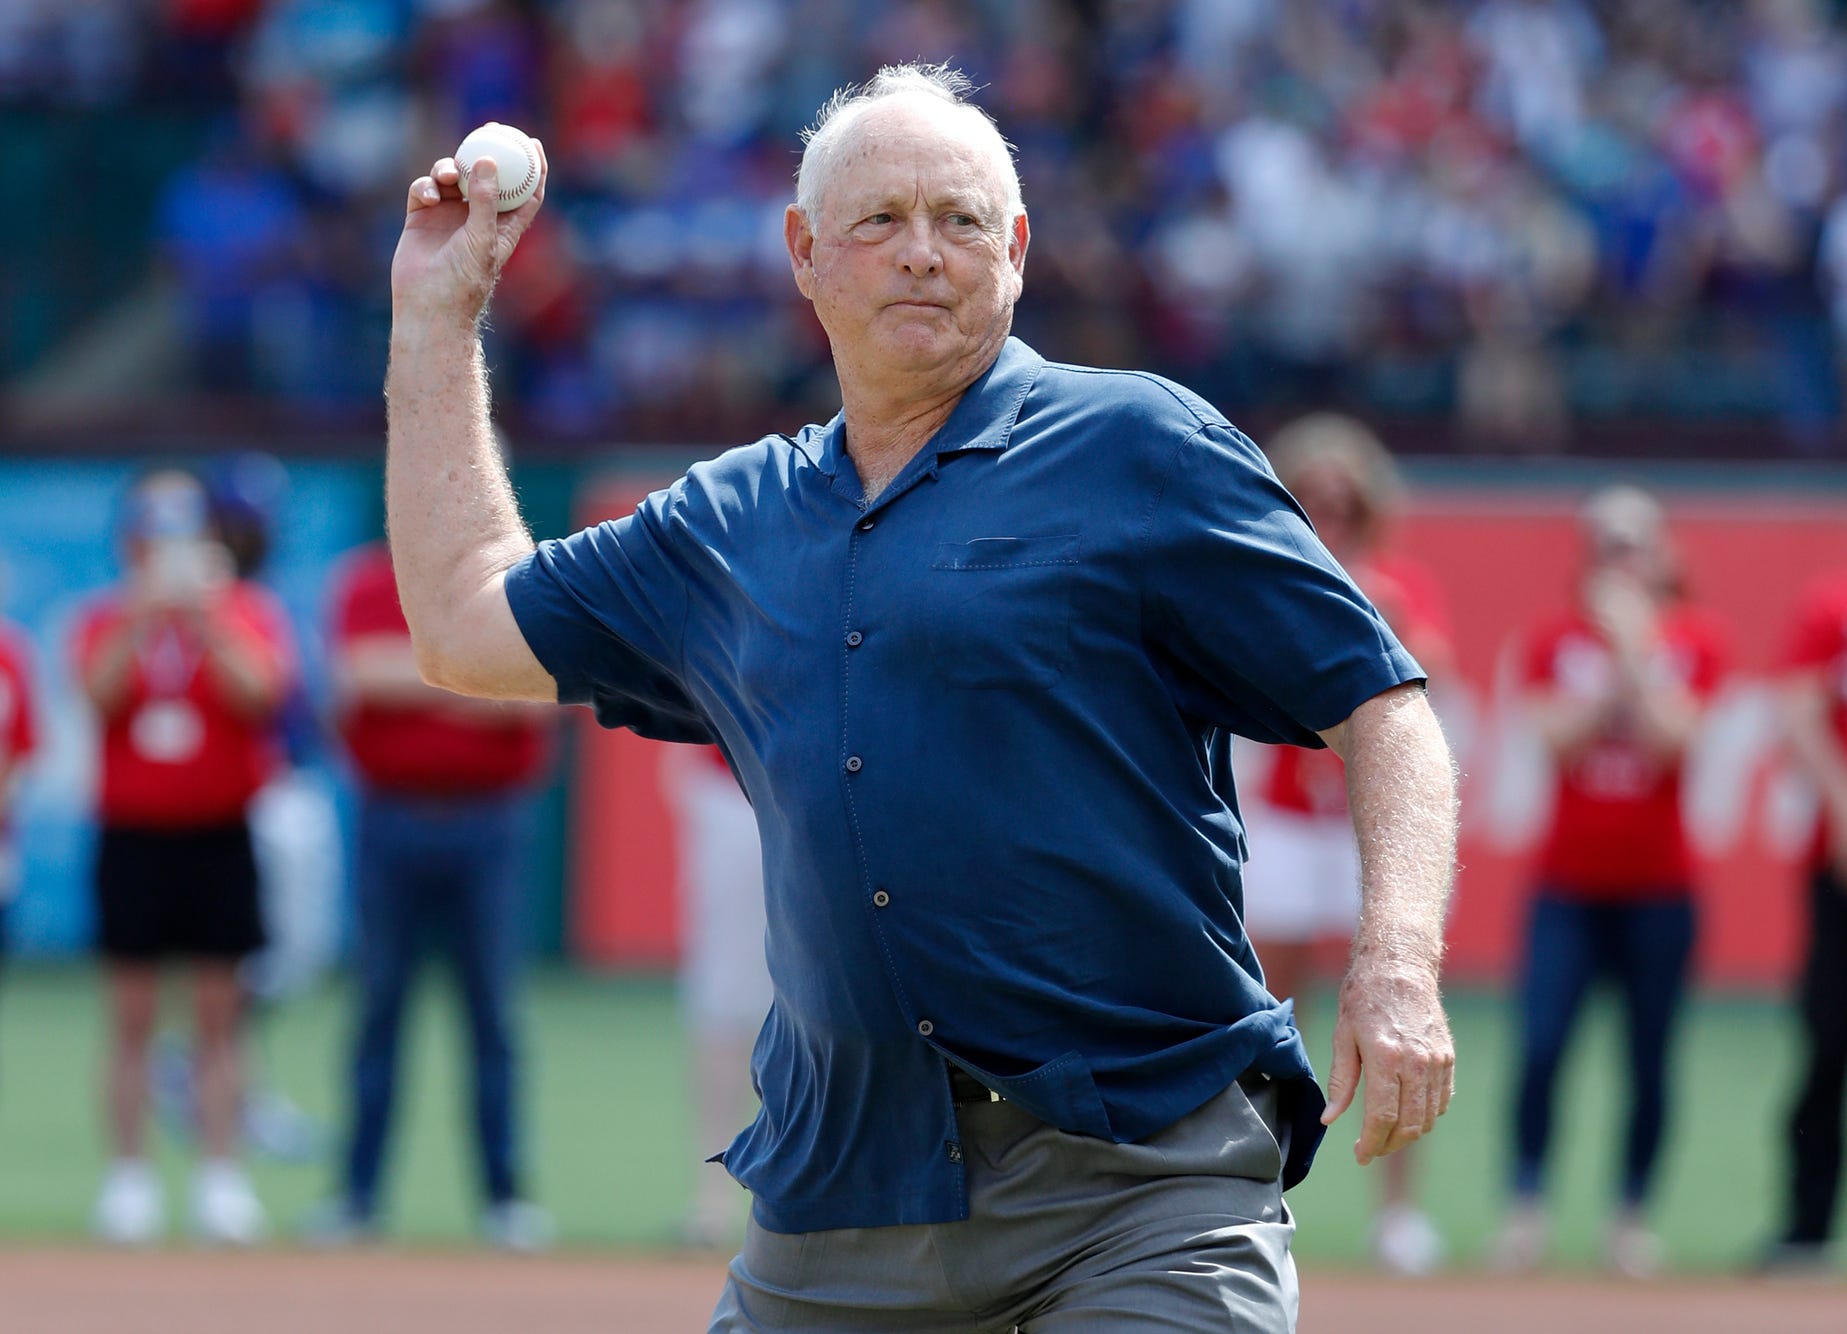 Nolan Ryan 75 Would Still Like A Chance To Help Guide An Mlb Team He